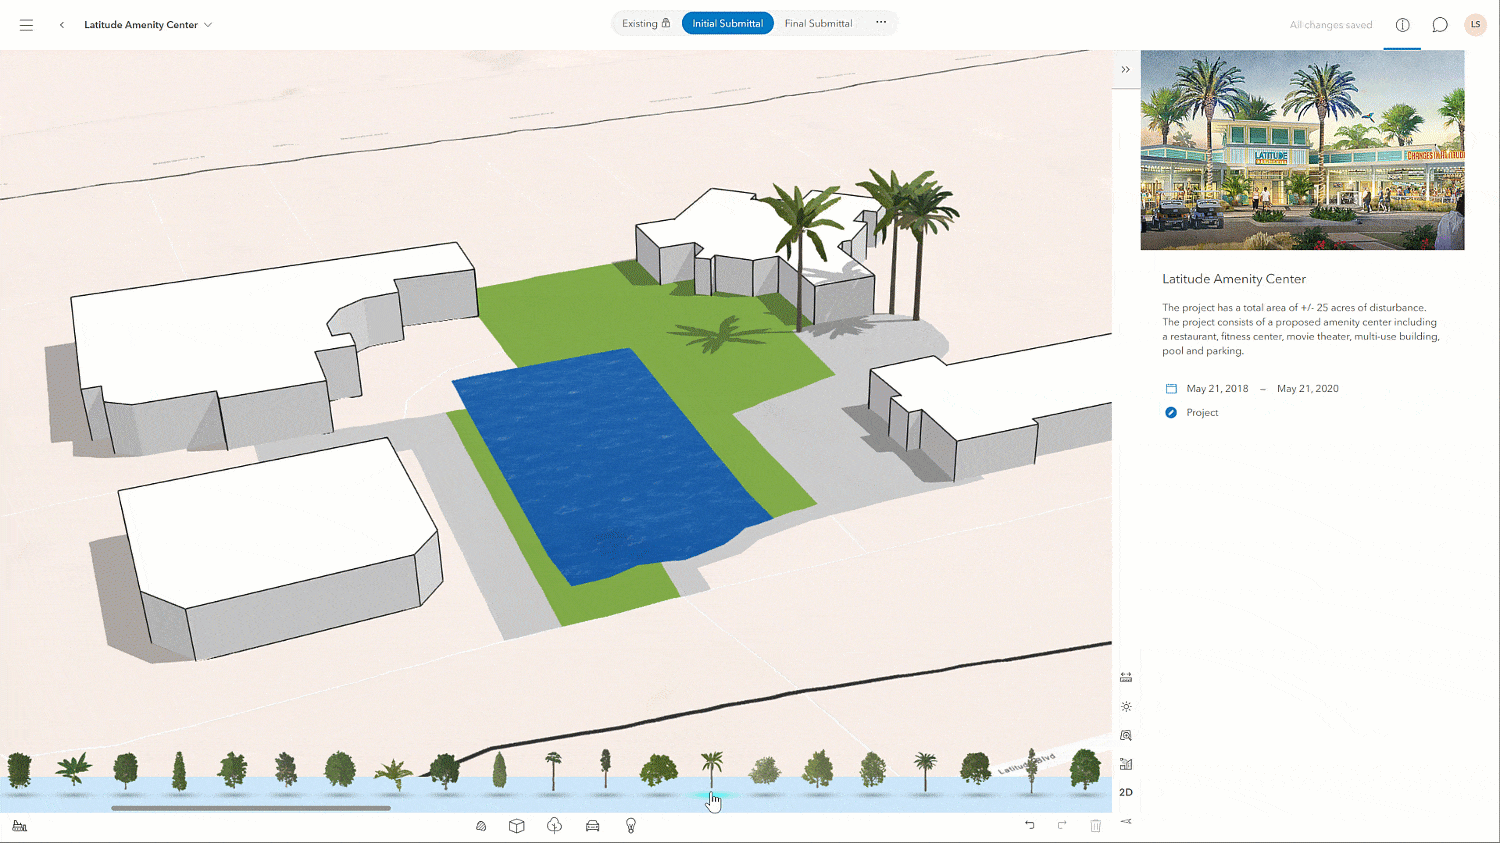 A project scenario webscene showing a small-scale redevelopment project and the placement of 3D trees.